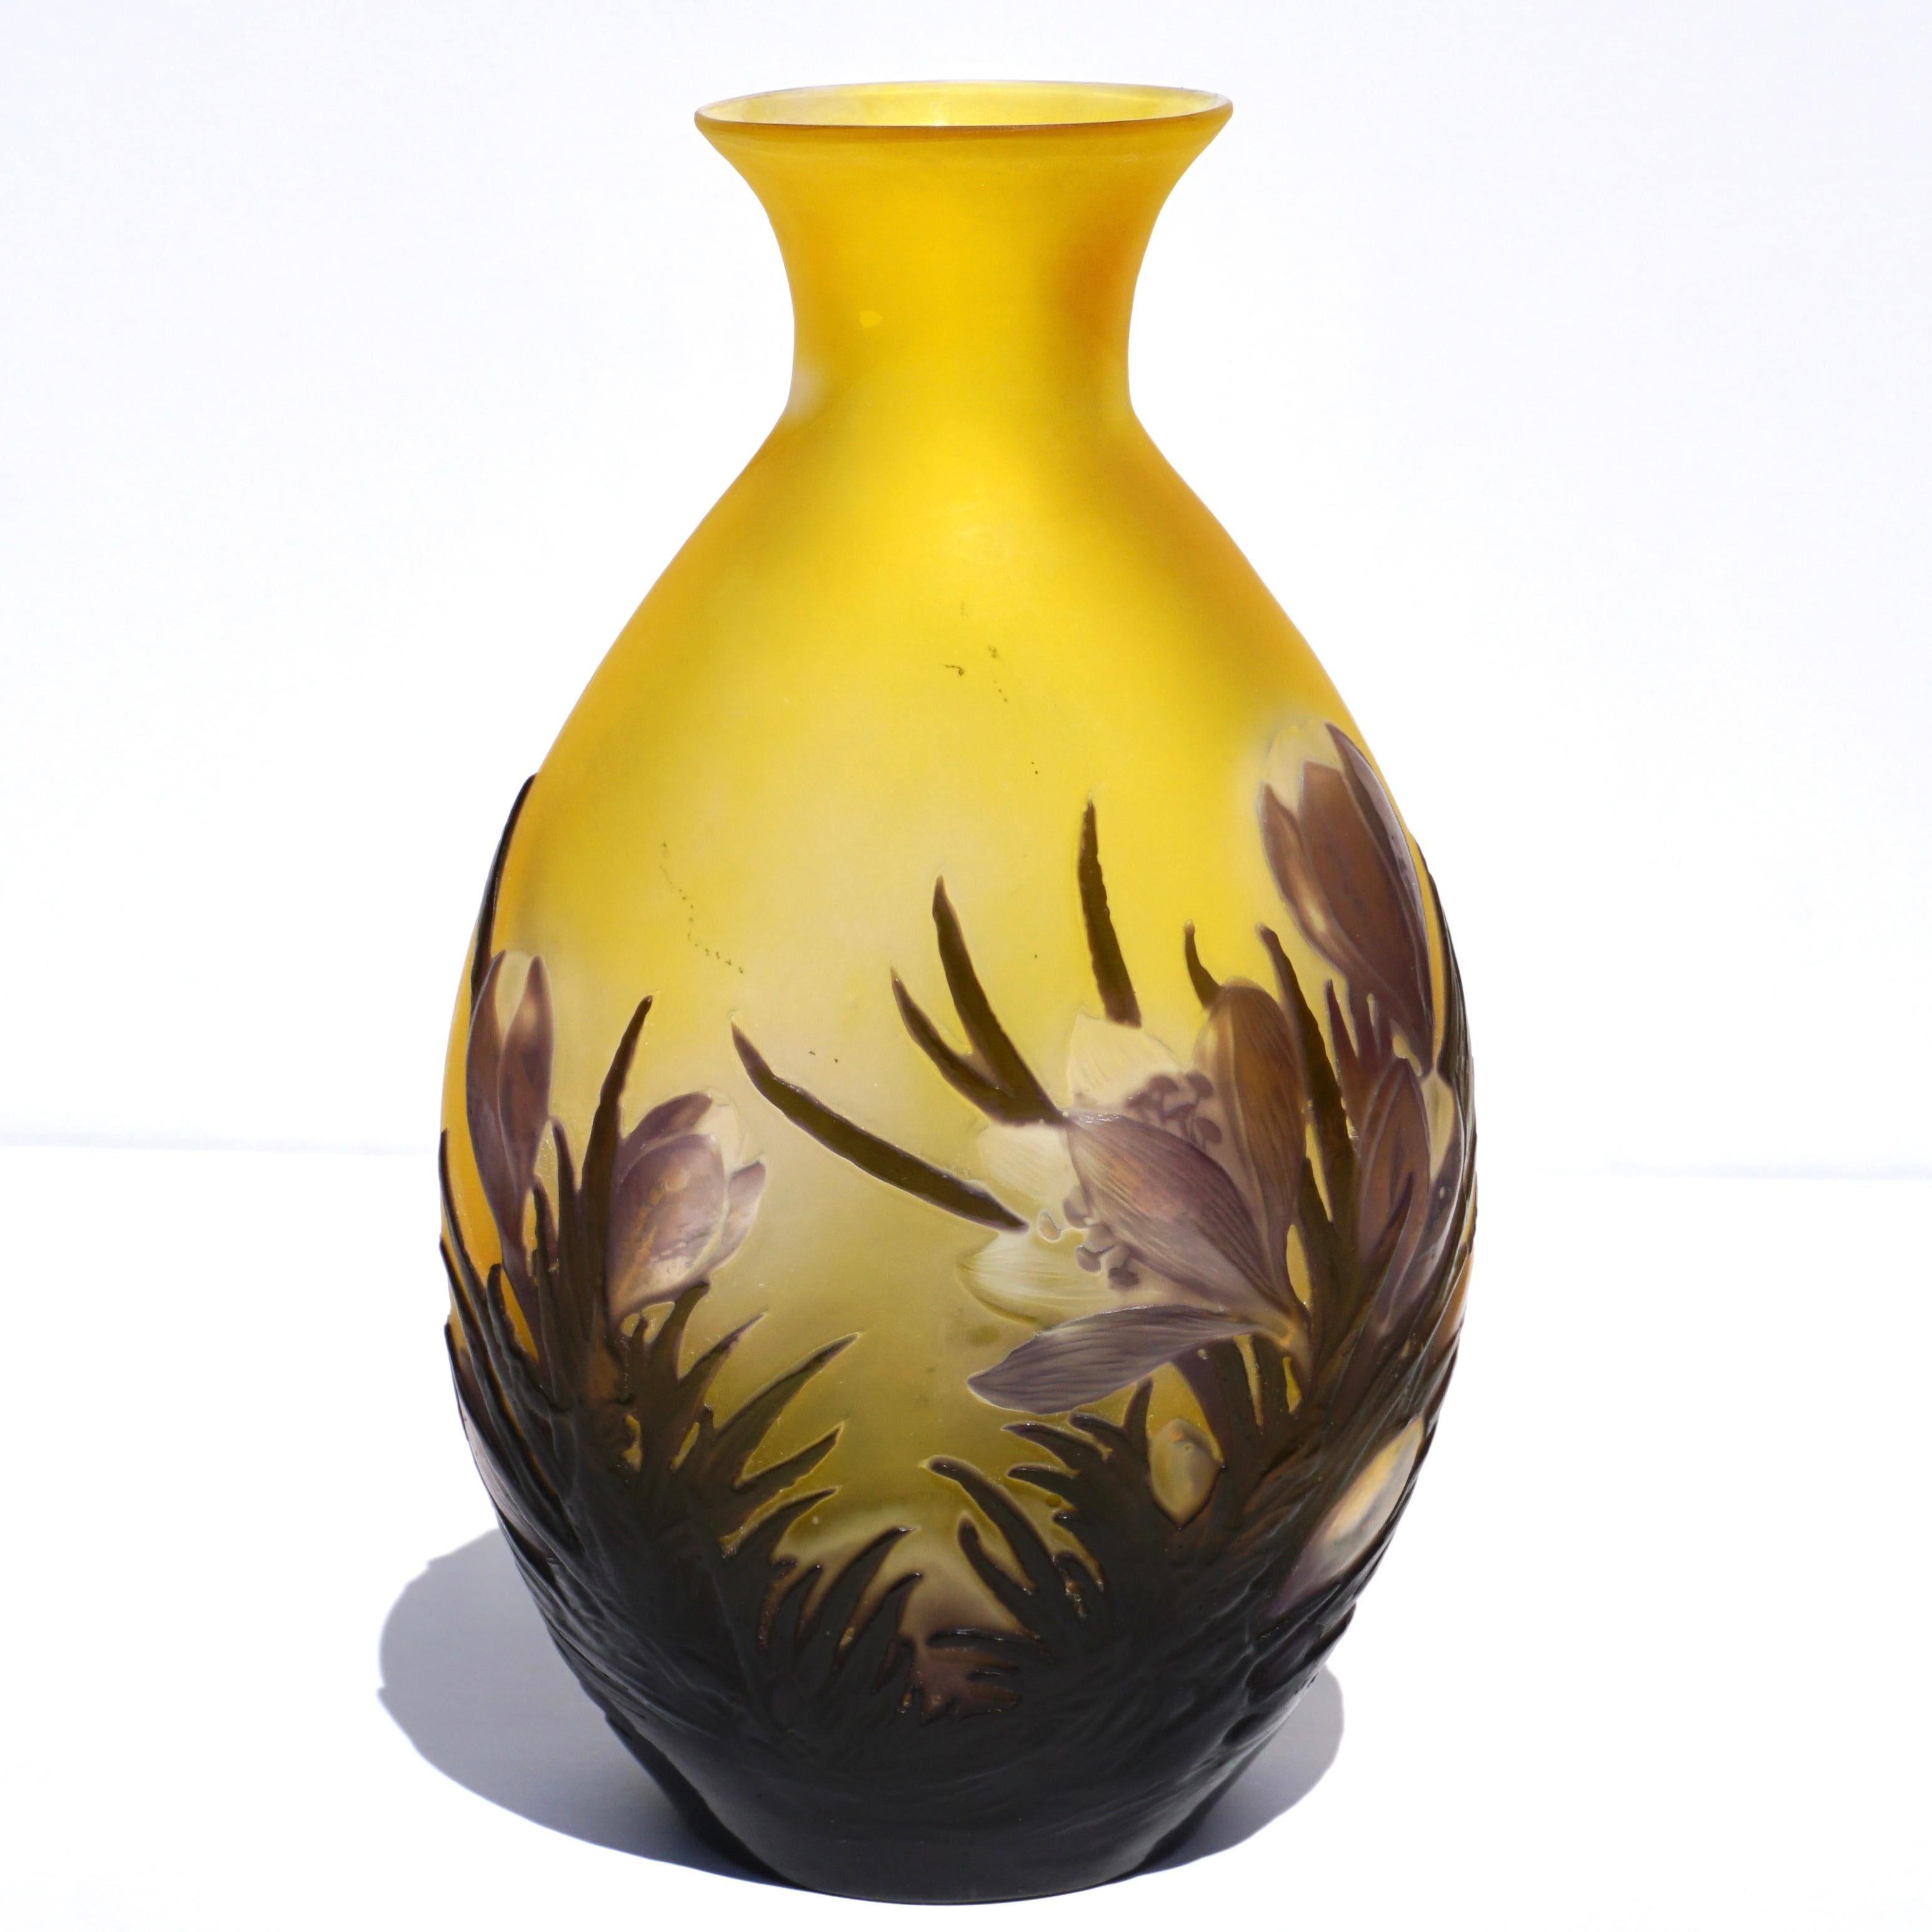 A wonderful and rare Mold Blown Tulip or Crocus vase by Emile Galle. Nancy France circa 1900

This sumptuous crocus vase has protruding purple flowers alond with thick wheel carved and cameo acid etched reed leaves on a frosty yellow background. The